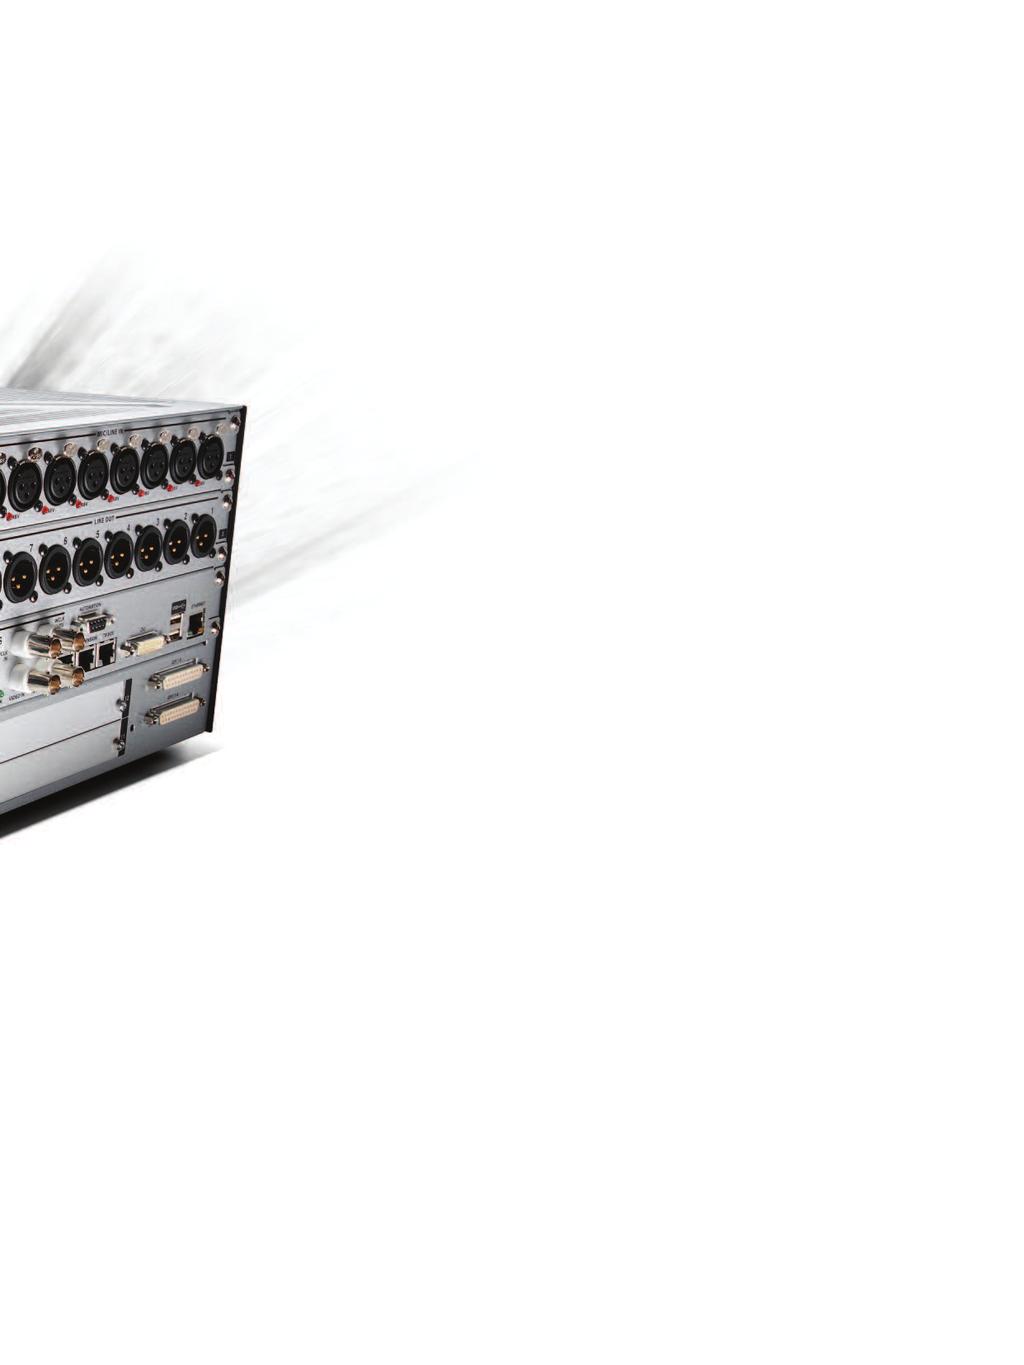 Optional D21m I/O modules MADI Provides up to 64 channels of MADI I/O. The MADI card features optical inputs for fibre connections.